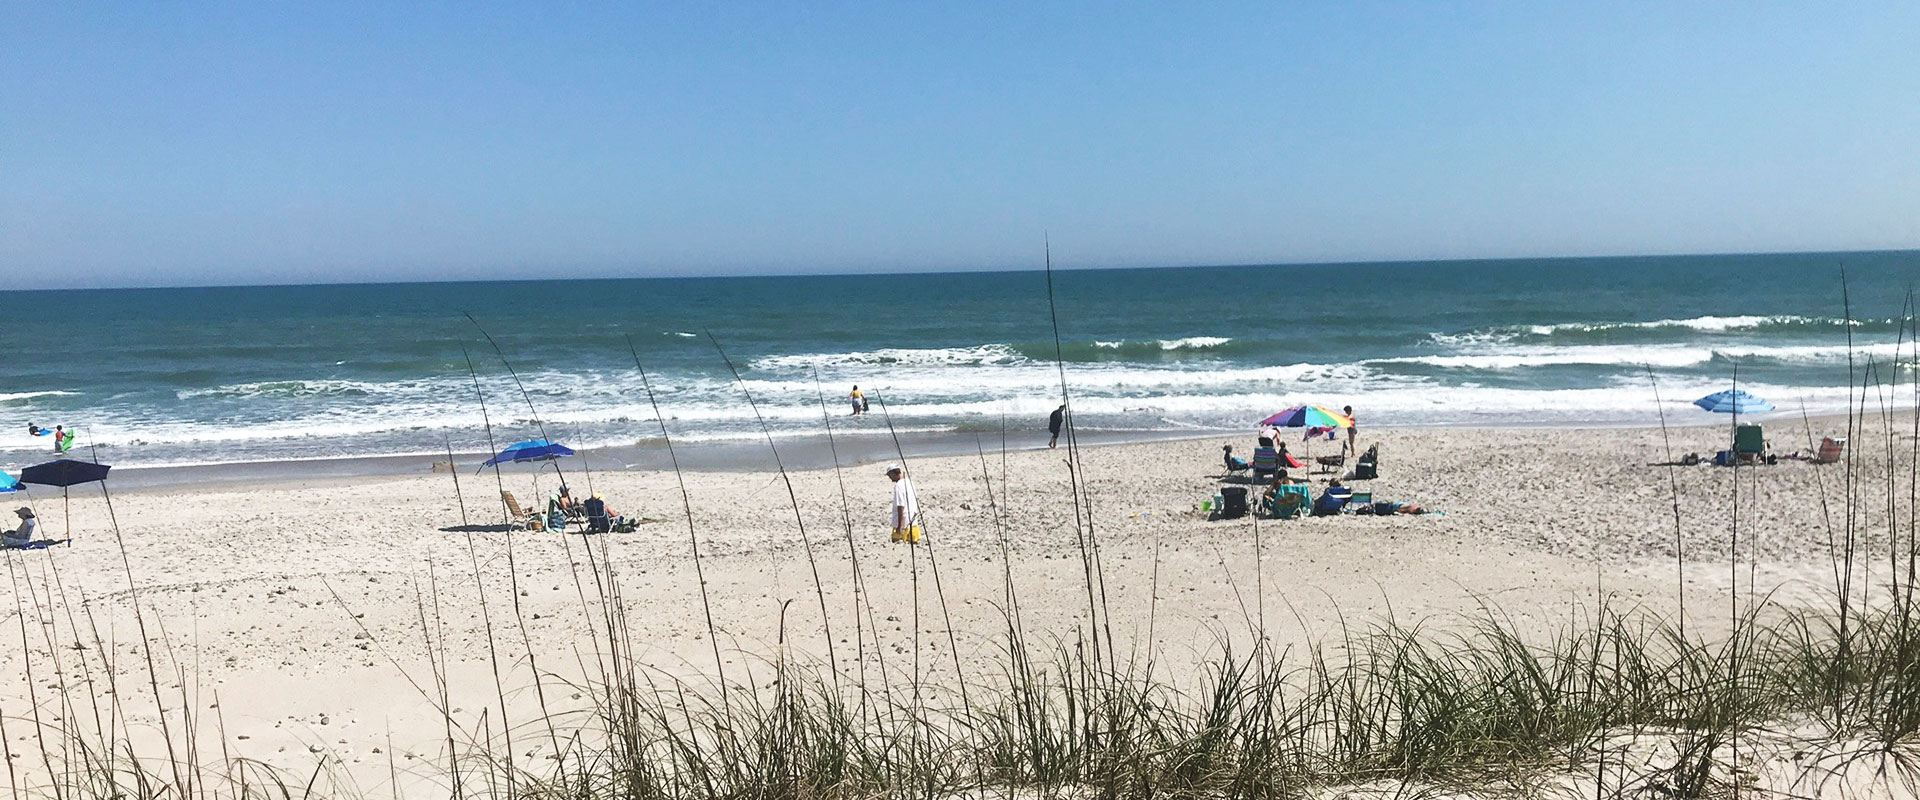 Topsail Island Beach Walking Distance From Your Topsail Island Vacation Rental 